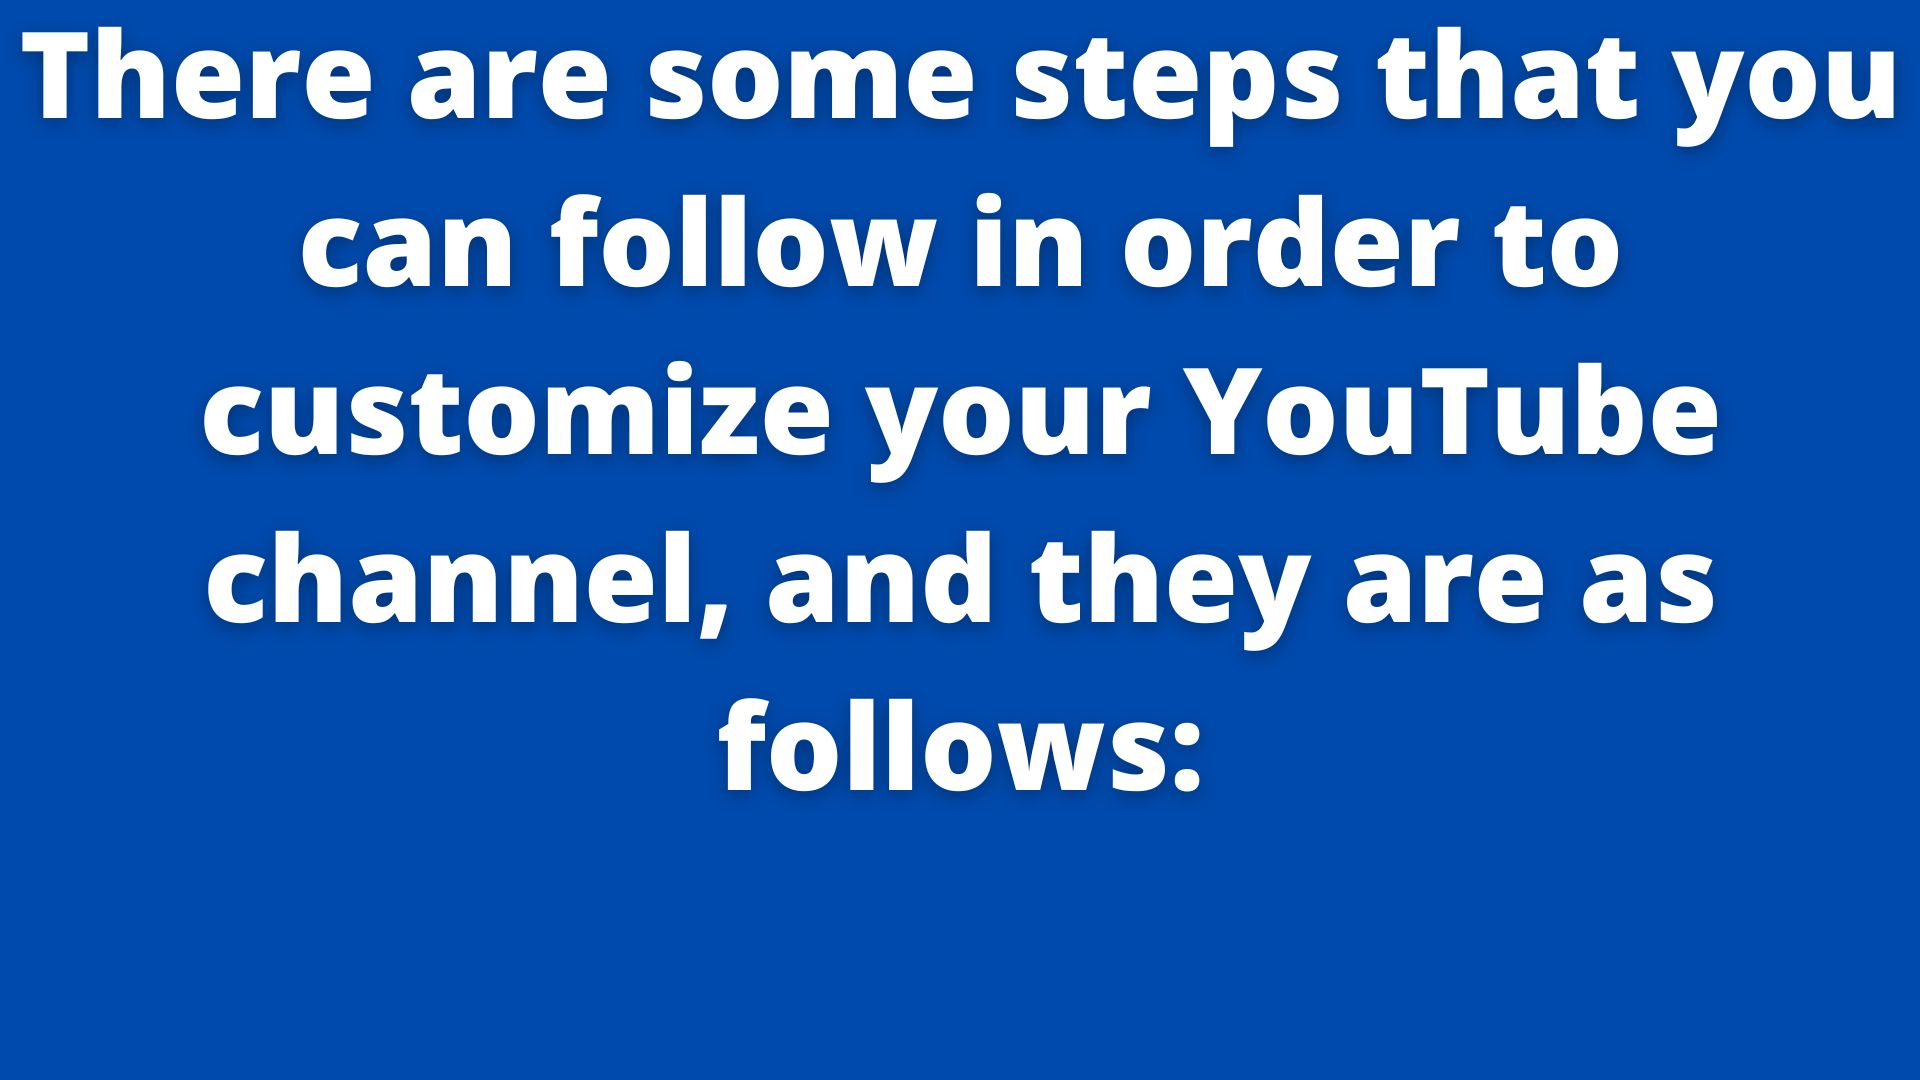 There Are Some Steps That You Can Follow In Order To Customize Your Youtube Channel, And They Are As Follows: